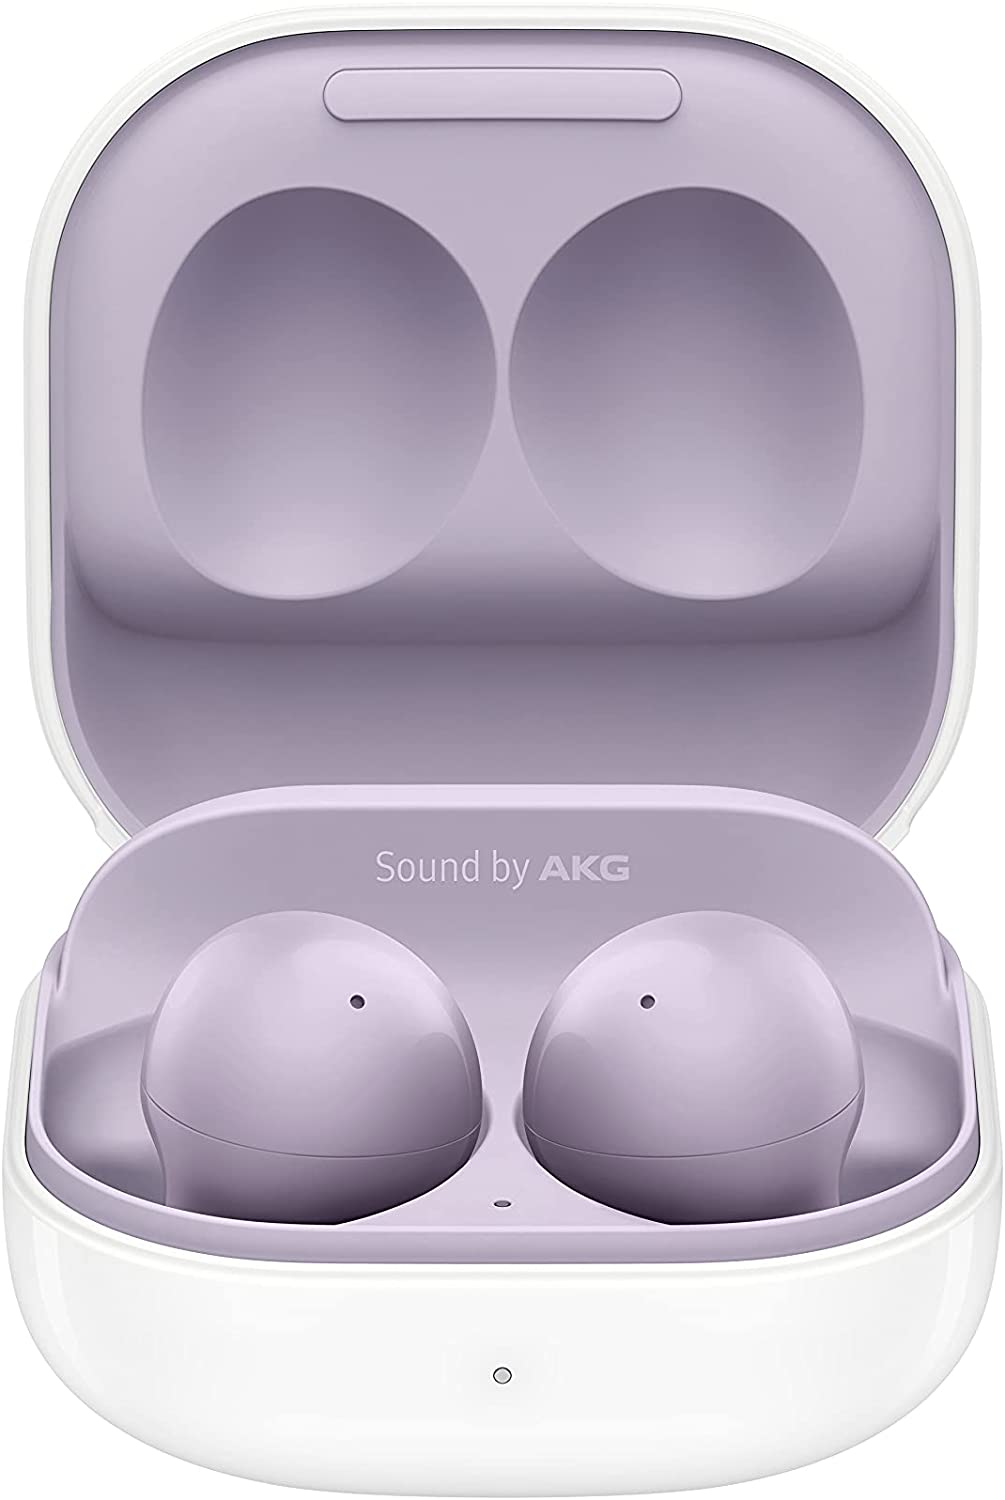 Samsung Galaxy Buds 2 Noise Cancelling Wireless Bluetooth Earbuds - Lavender